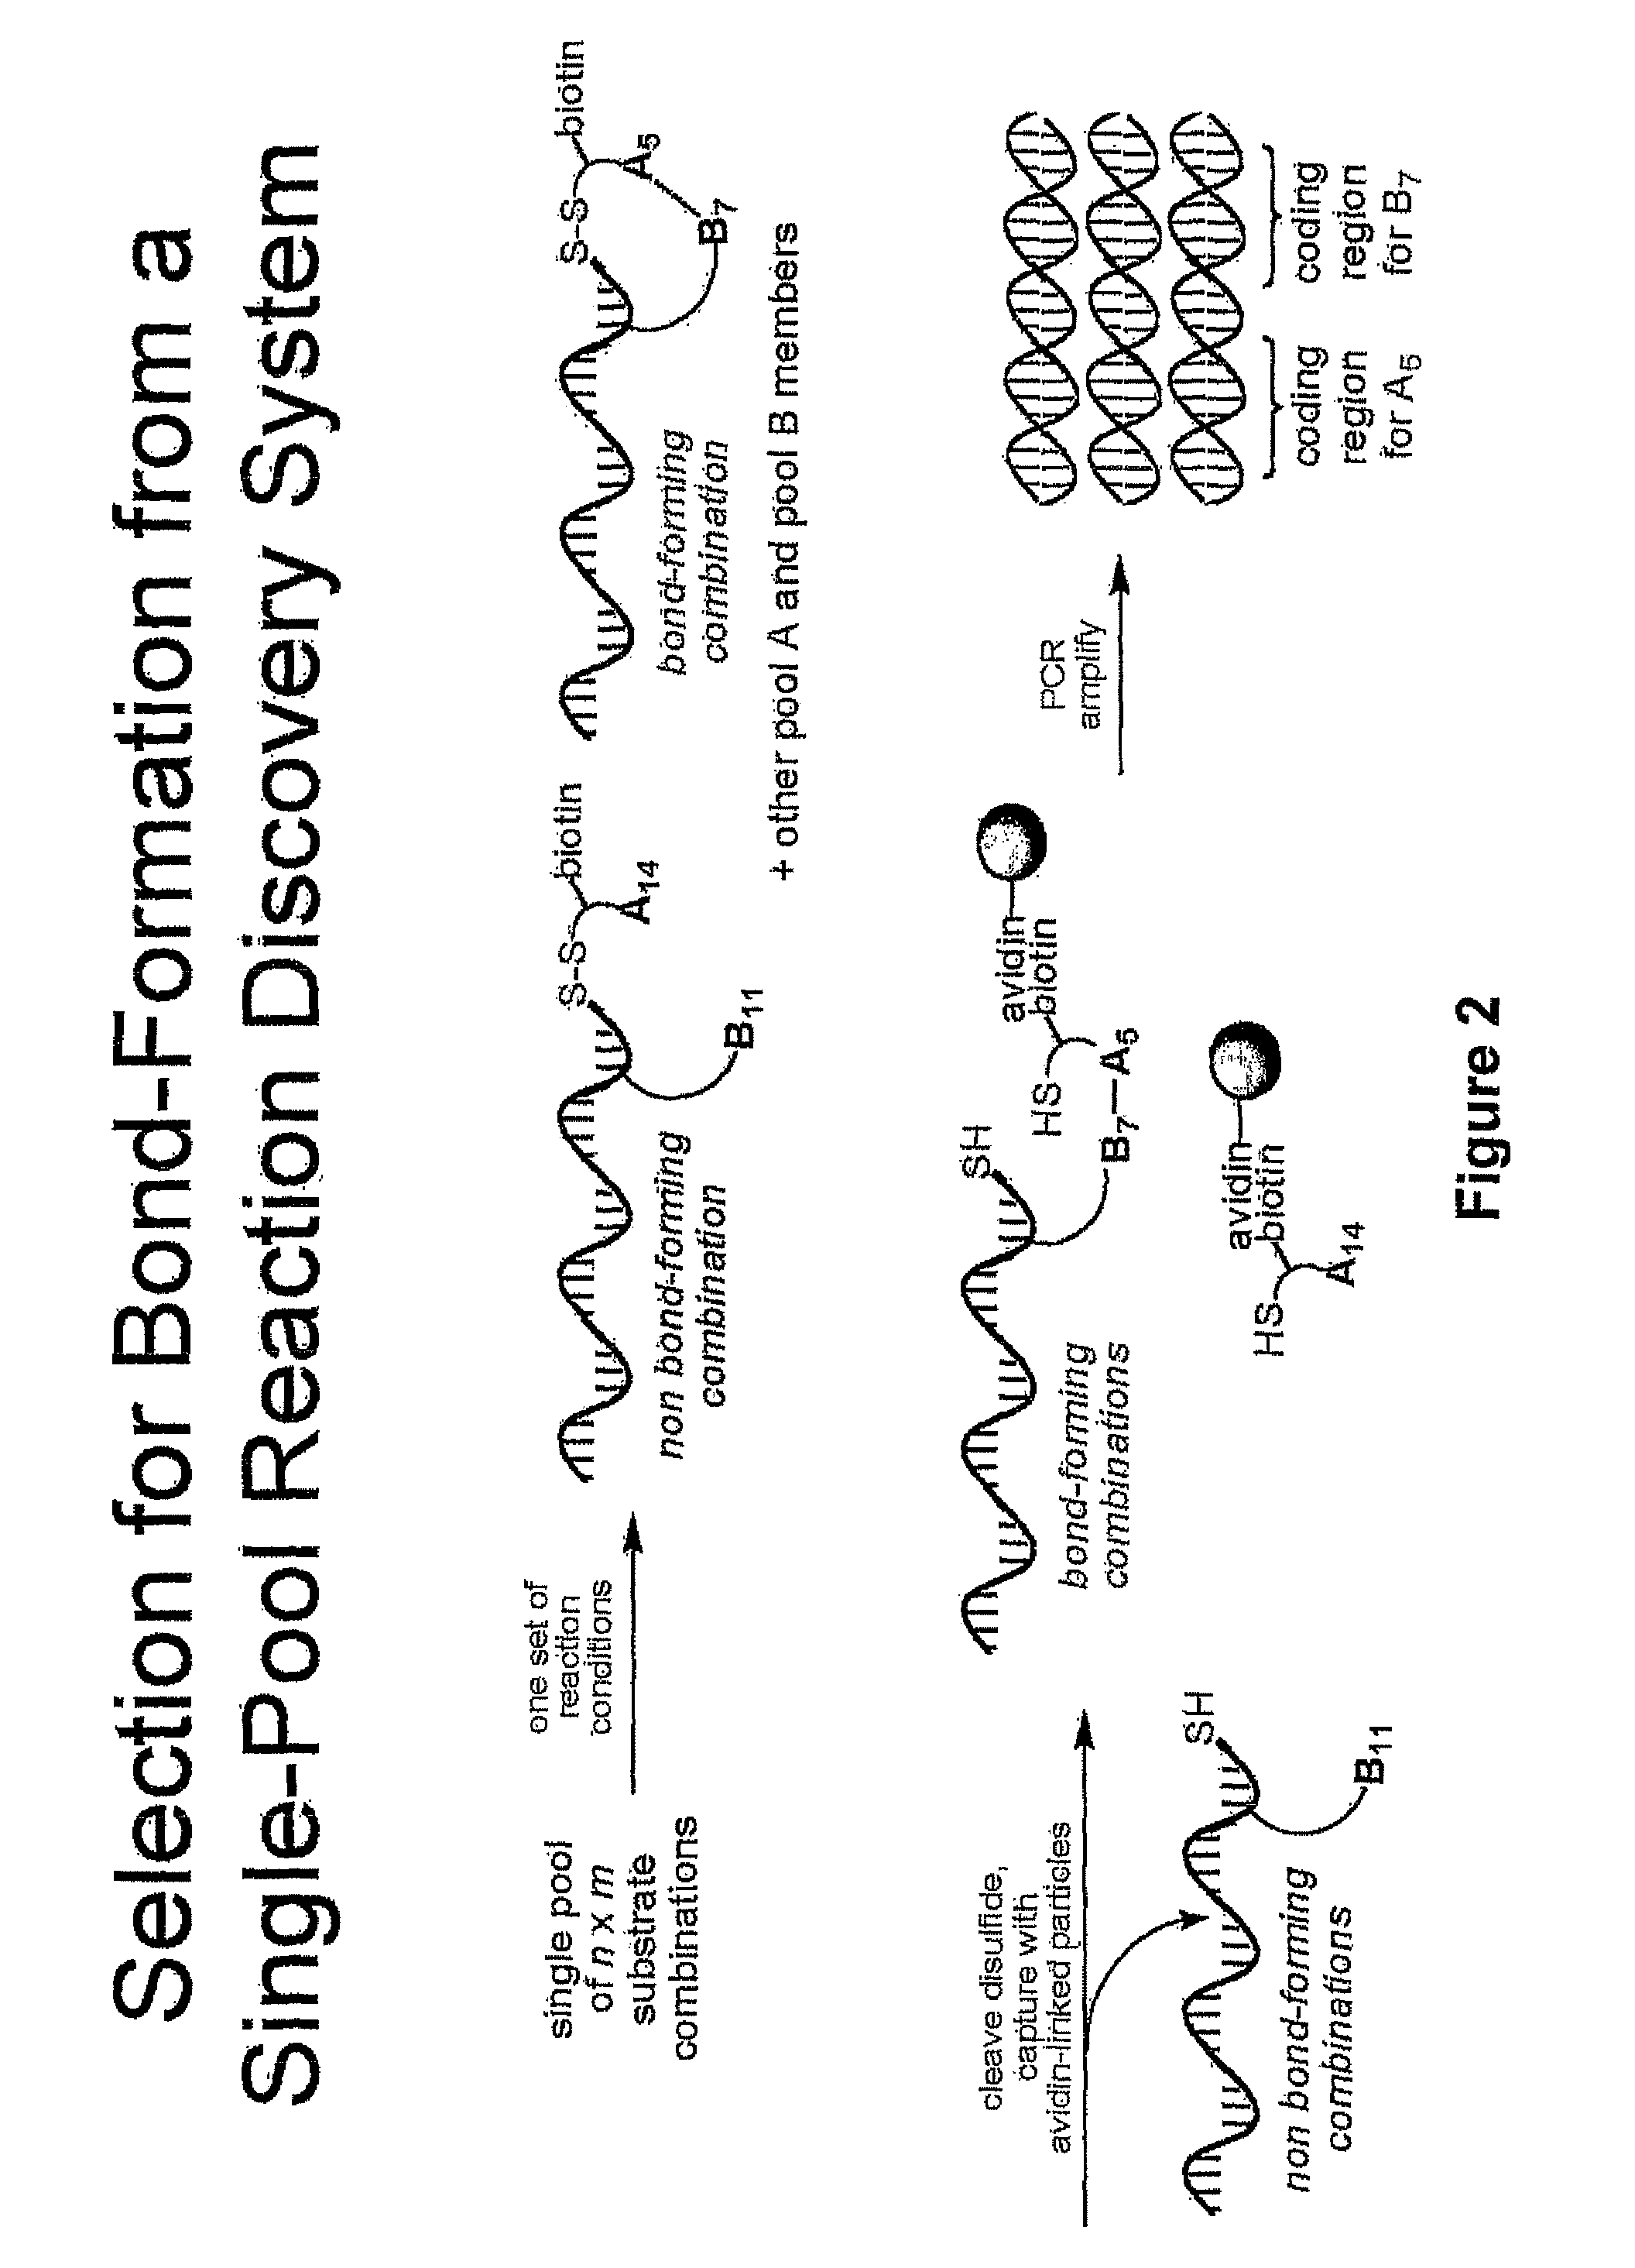 Reaction discovery system